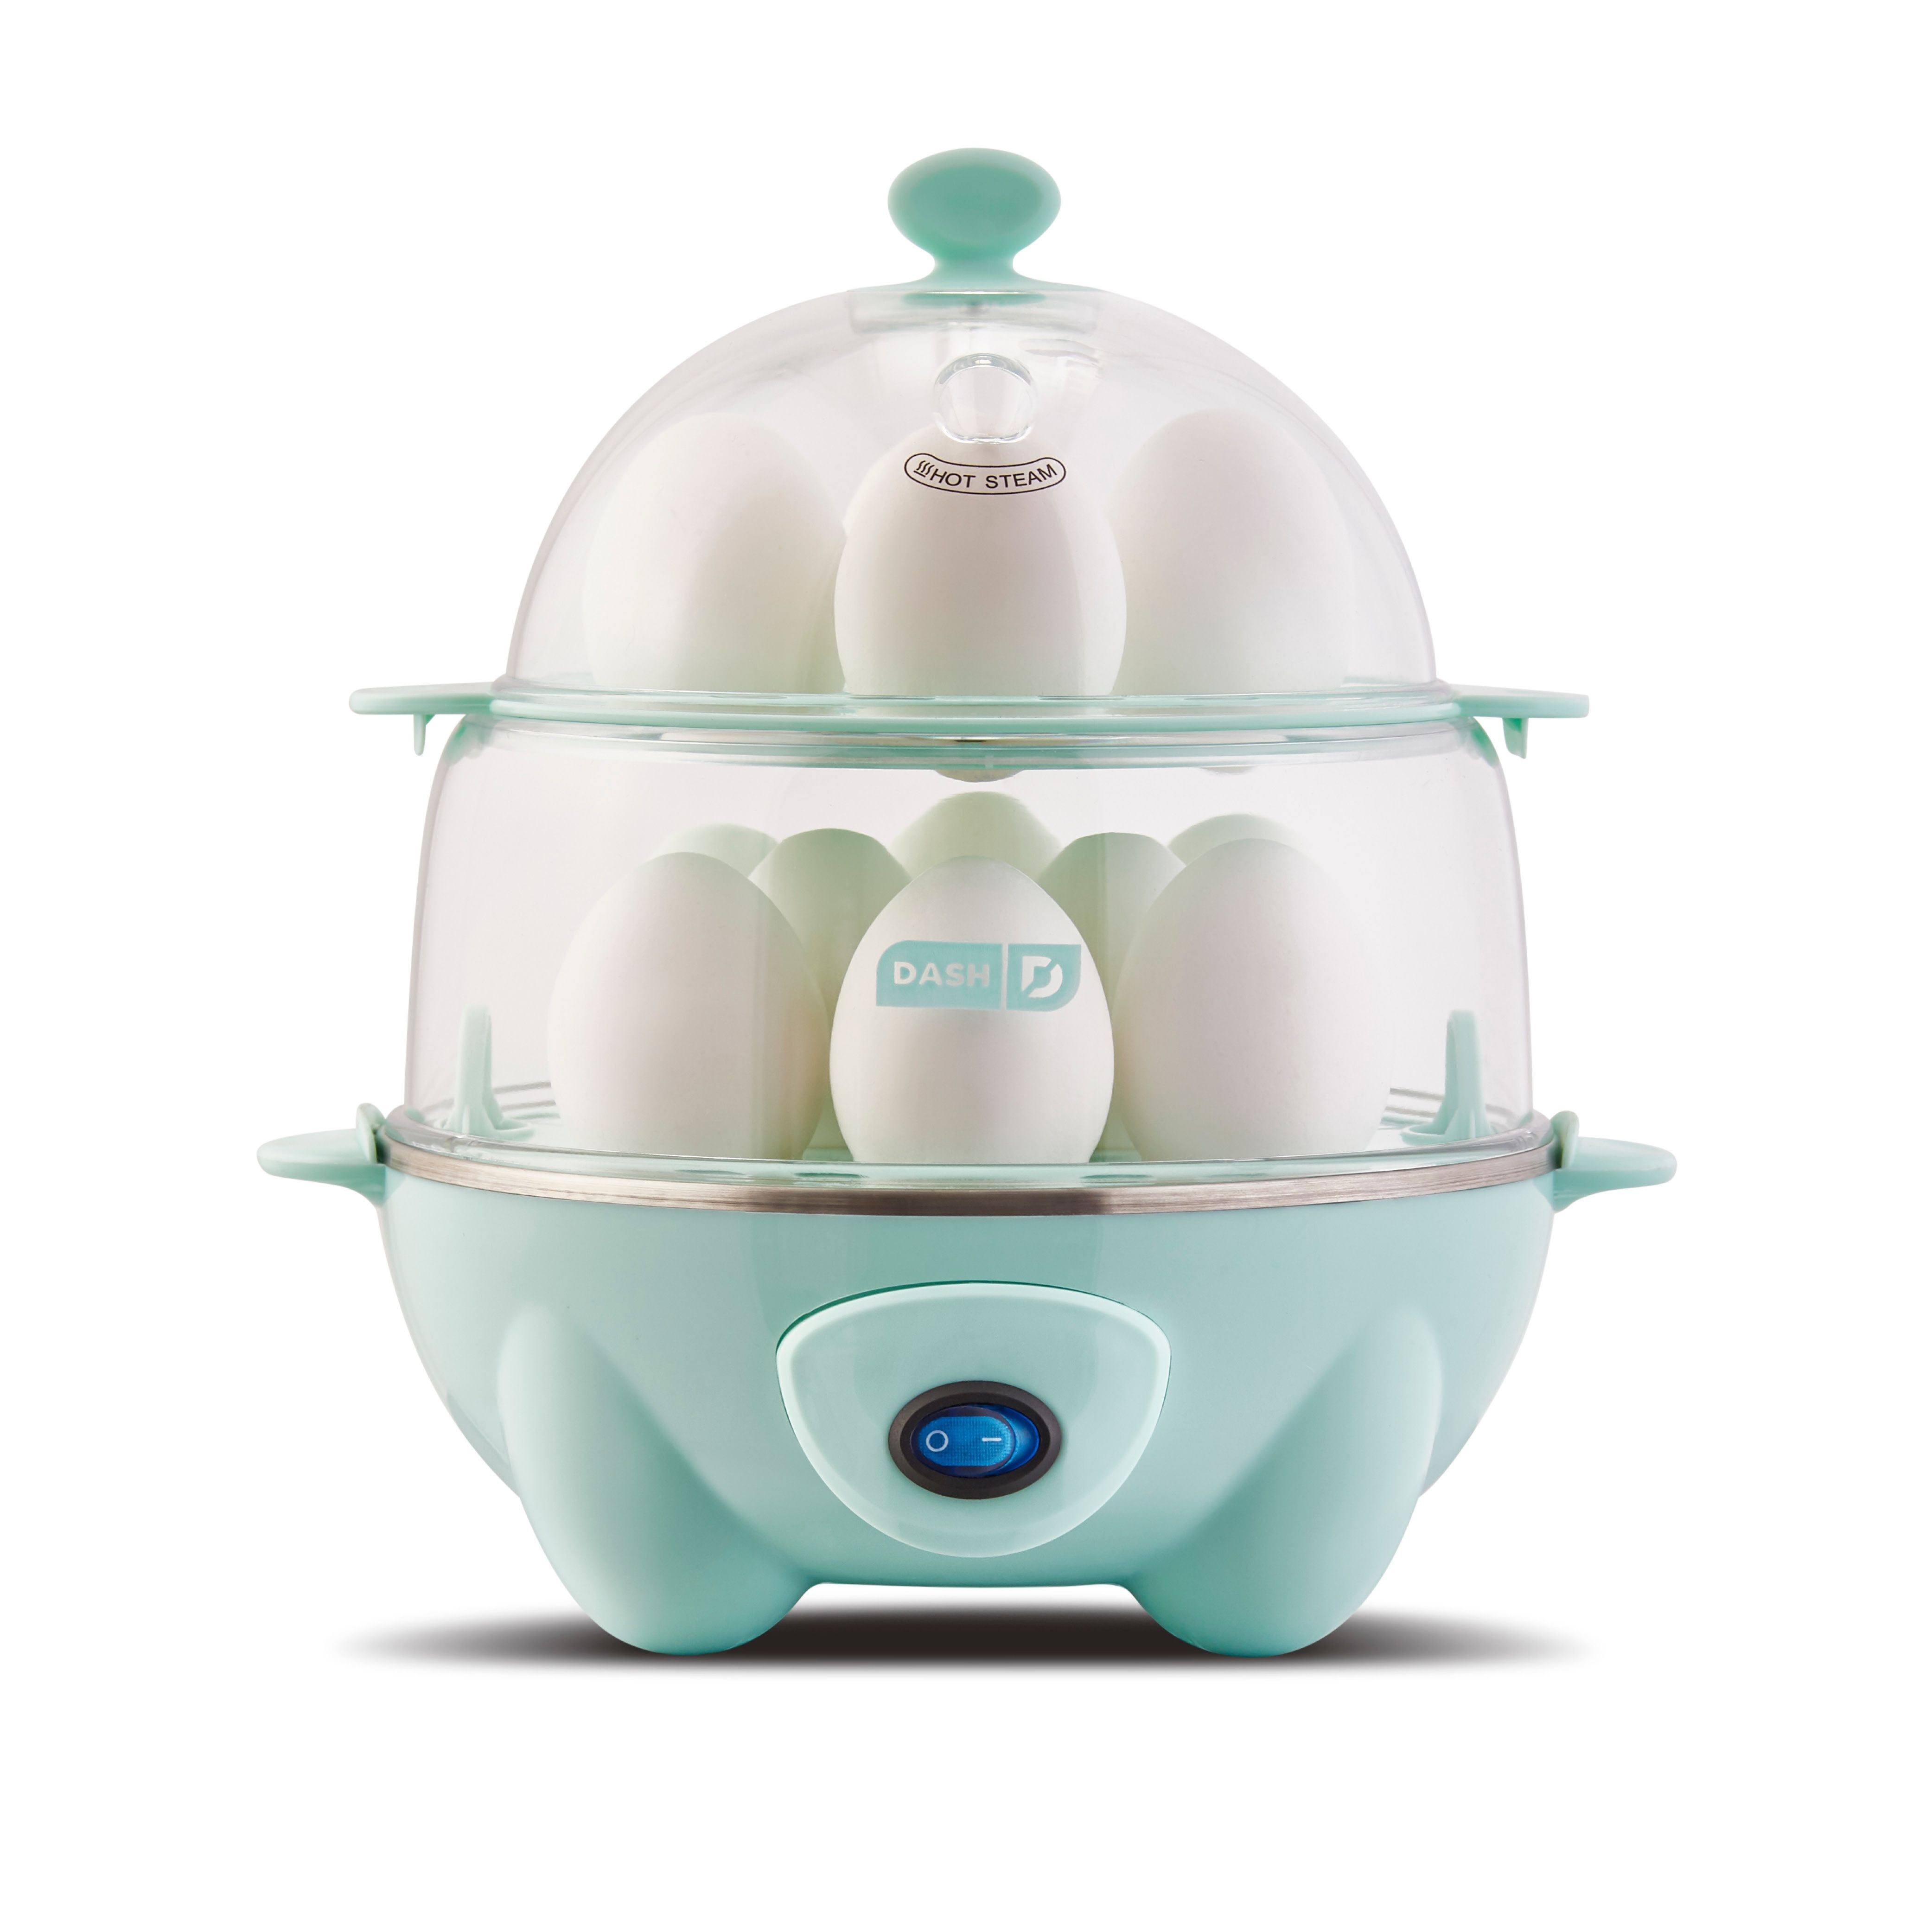 Dash Deluxe Egg Cooker for Hard Boiled, Poached, Scrambled Eggs, Omelets,  Steamed Vegetables, Dumplings & More, 12 Capacity, with Auto Shut off  Feature - Aqua - New 